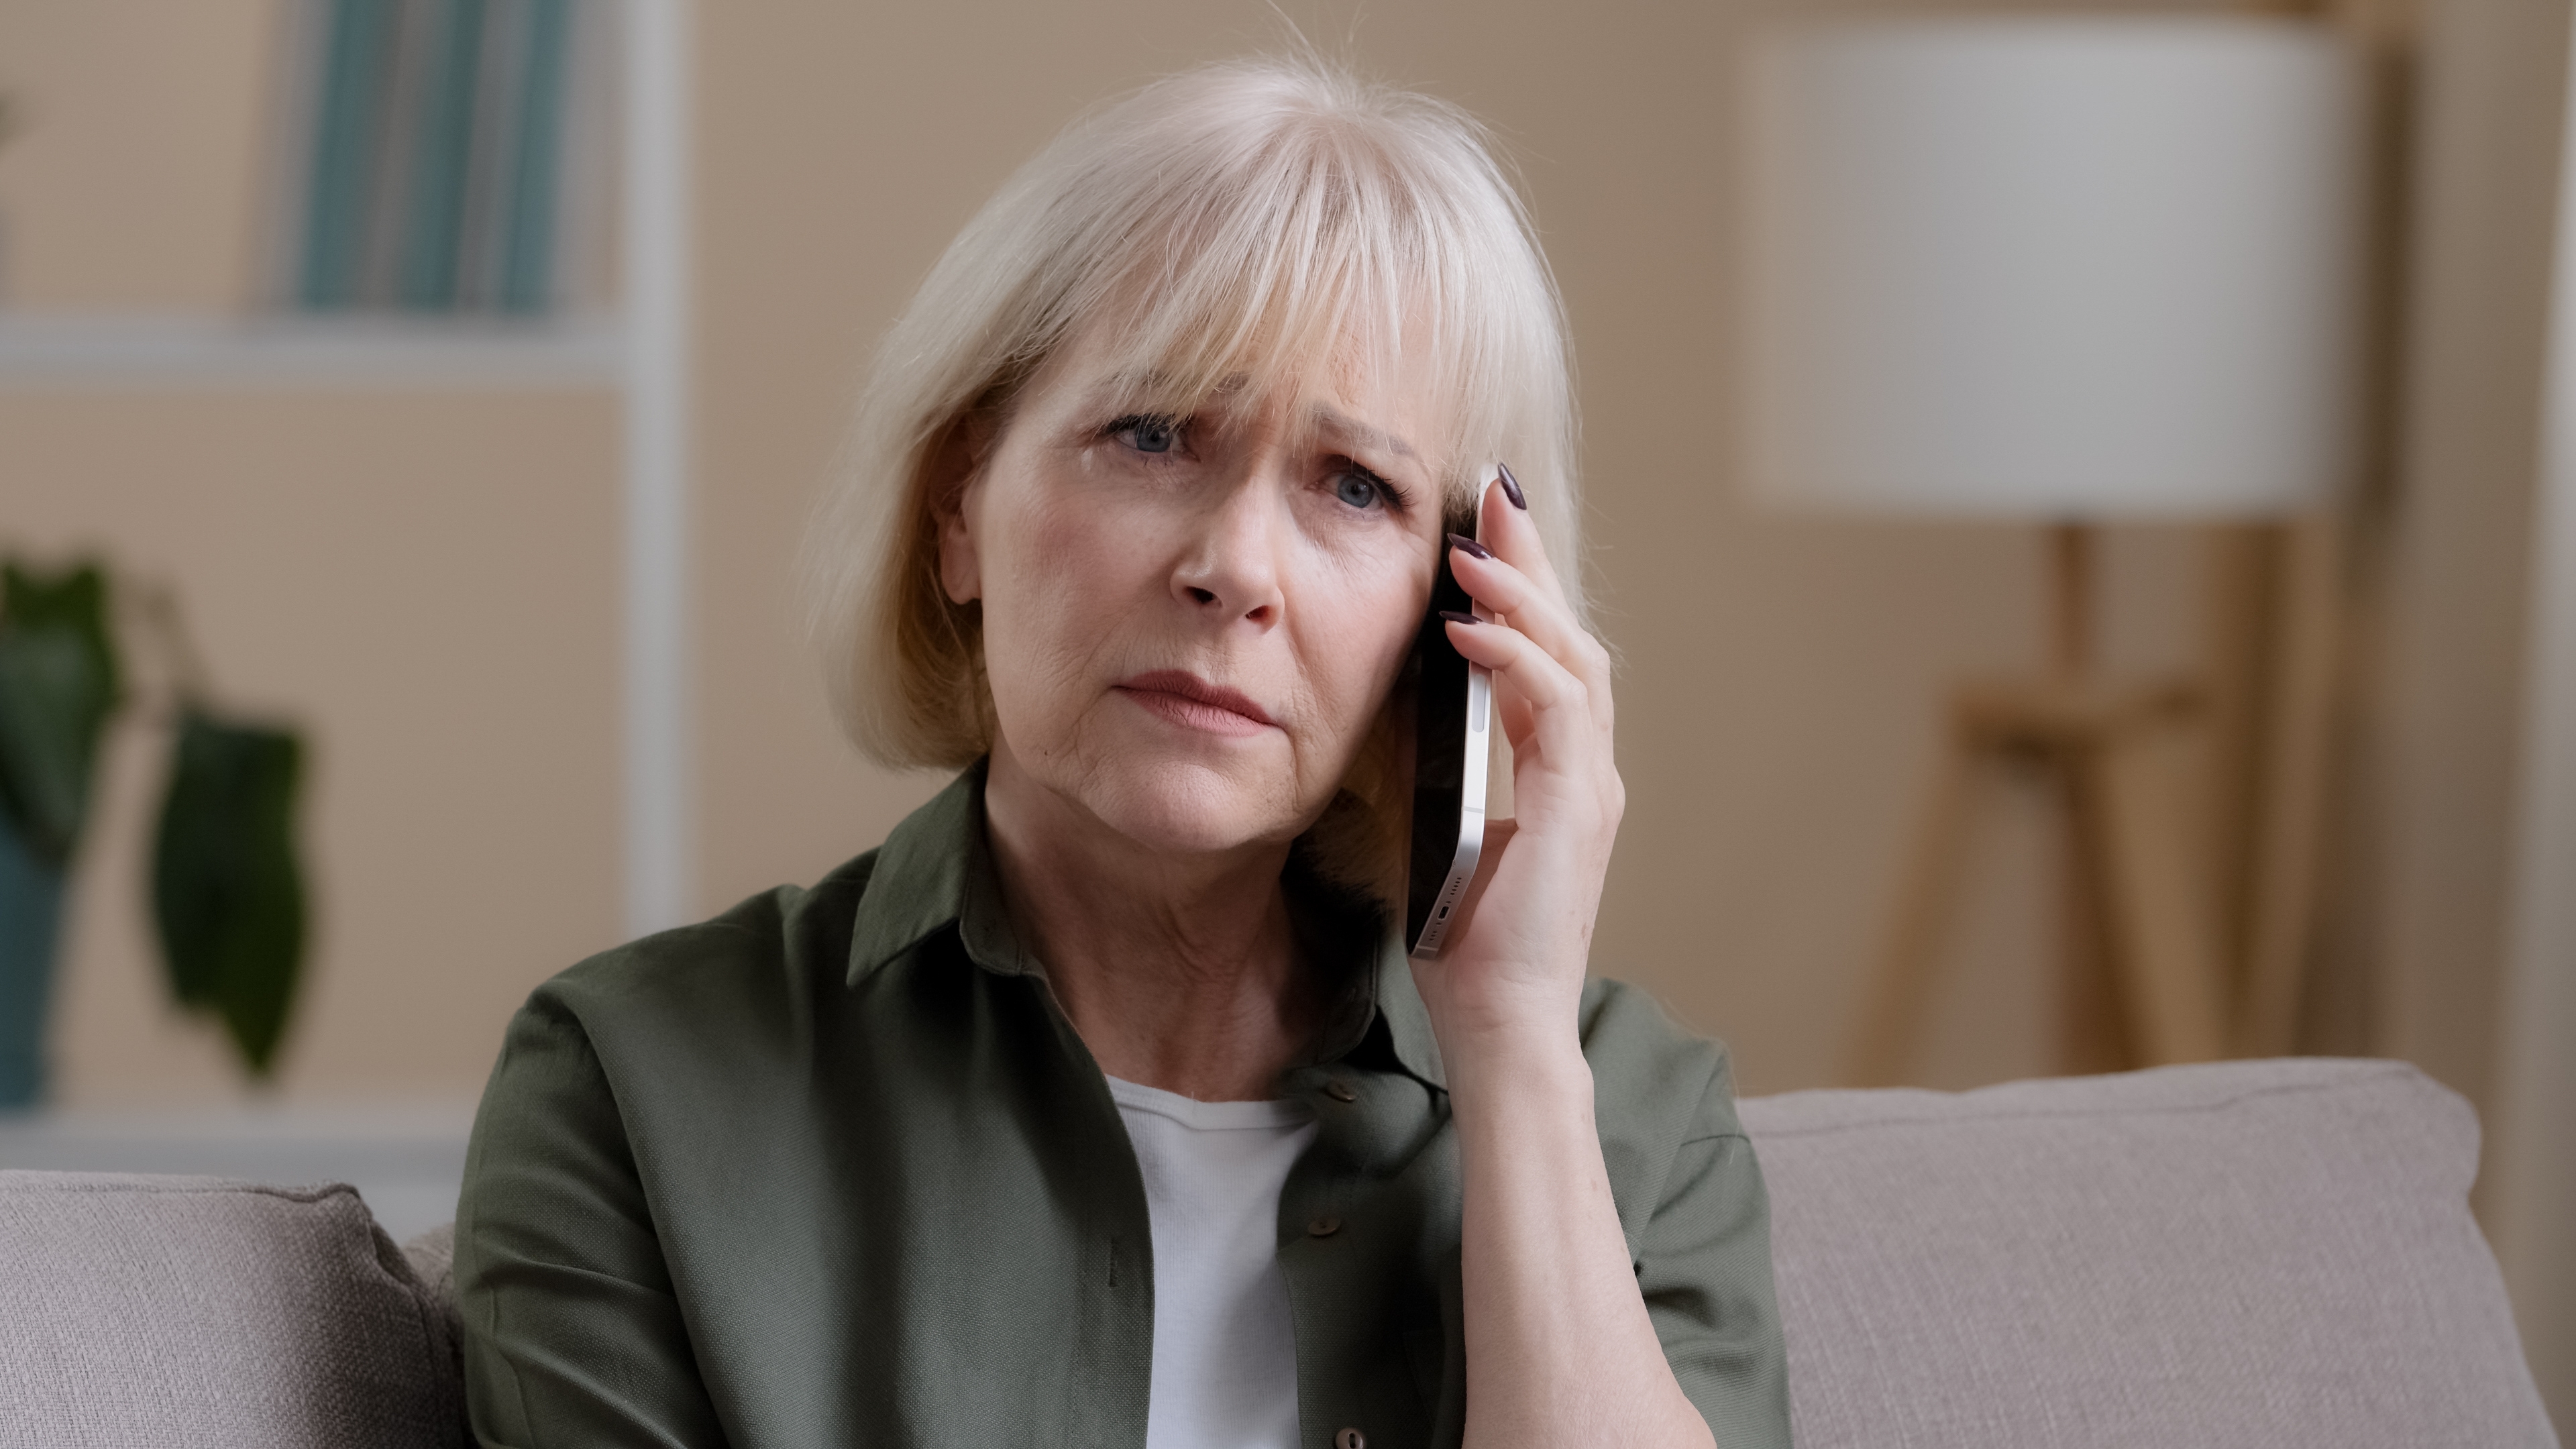 A worried senior woman talking on the phone | Source: Shutterstock